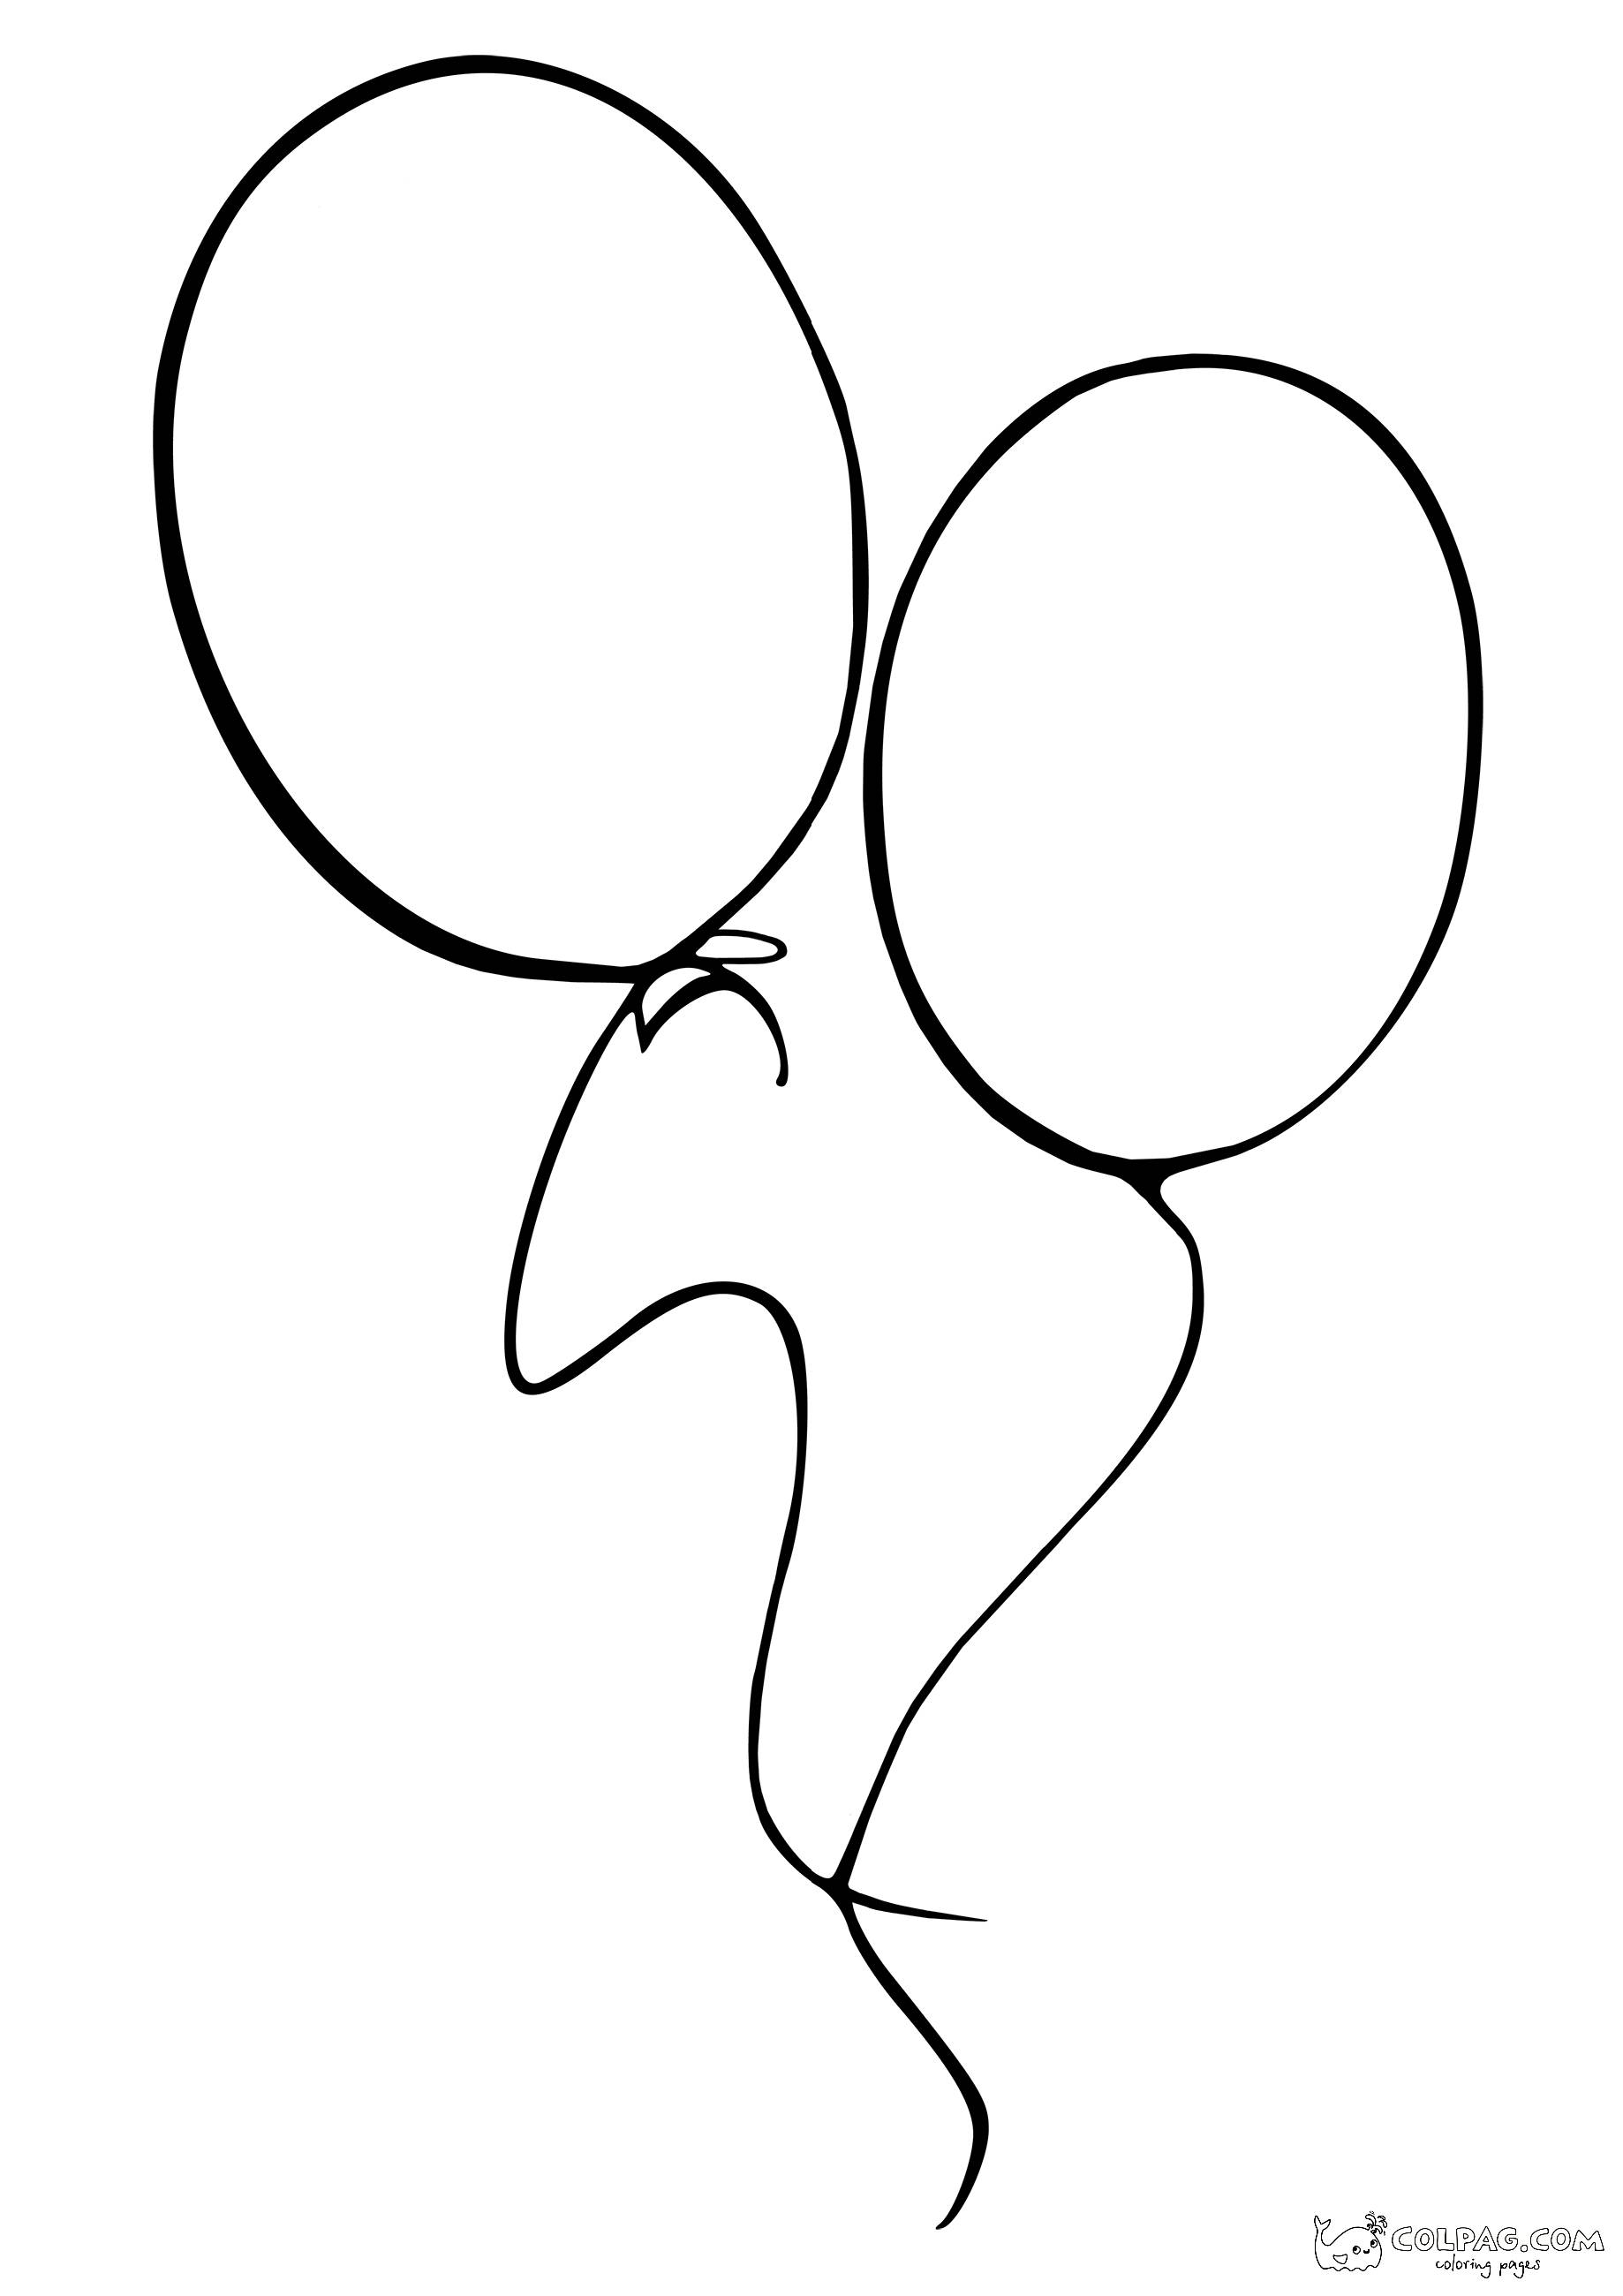 24-two-plain-baloons-coloring-page-colpag-24